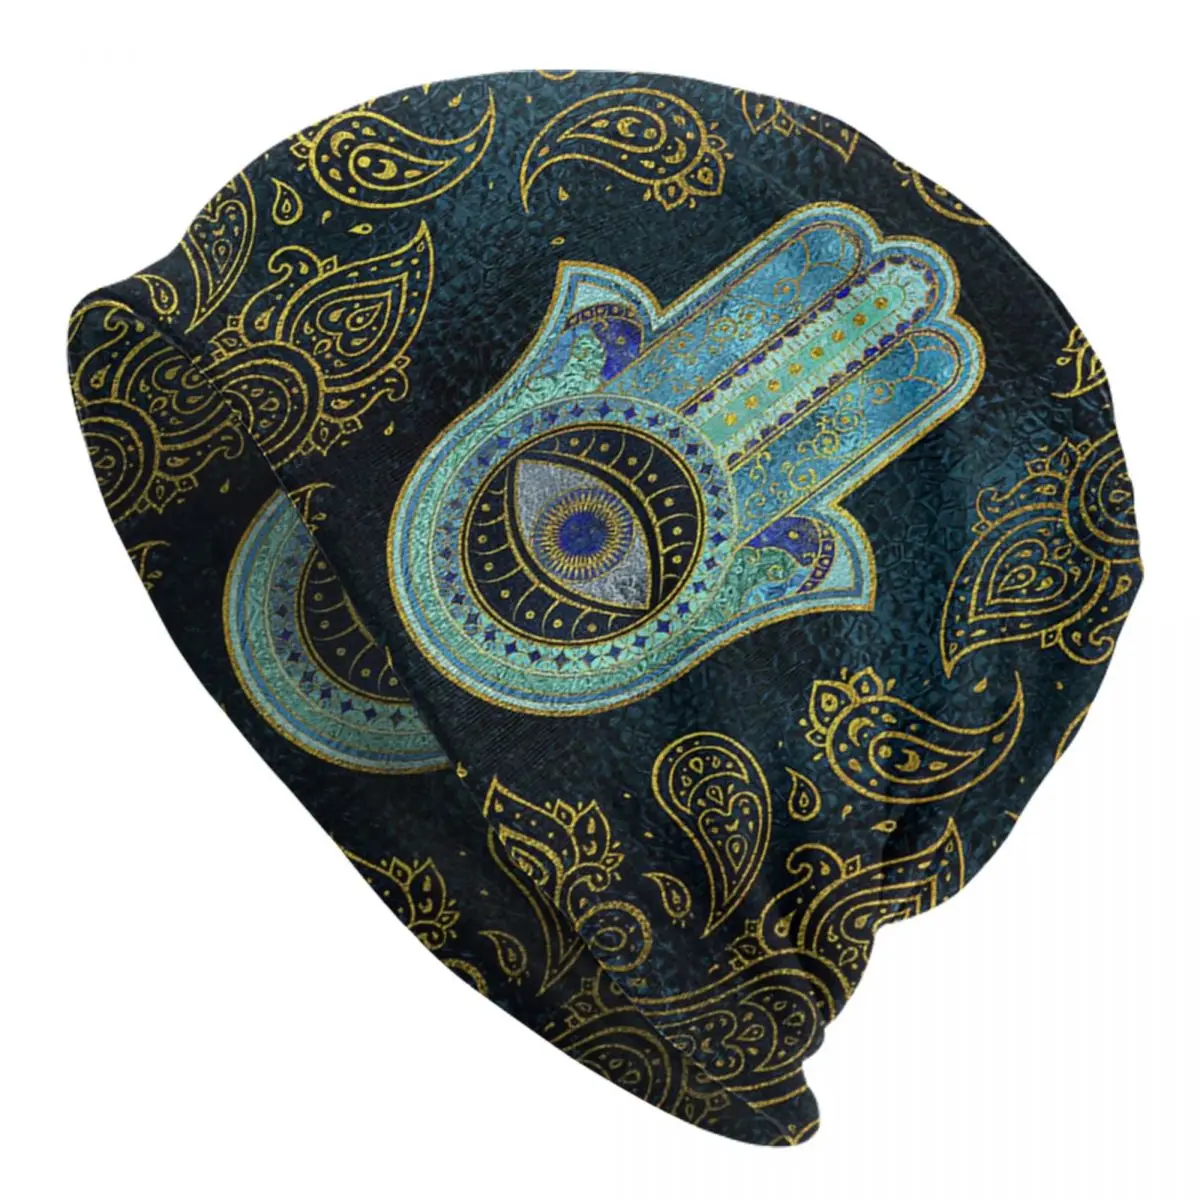 Decorative Hamsa Hand With Paisley Background Adult Men's Women's Knit Hat Keep warm winter Funny knitted hat